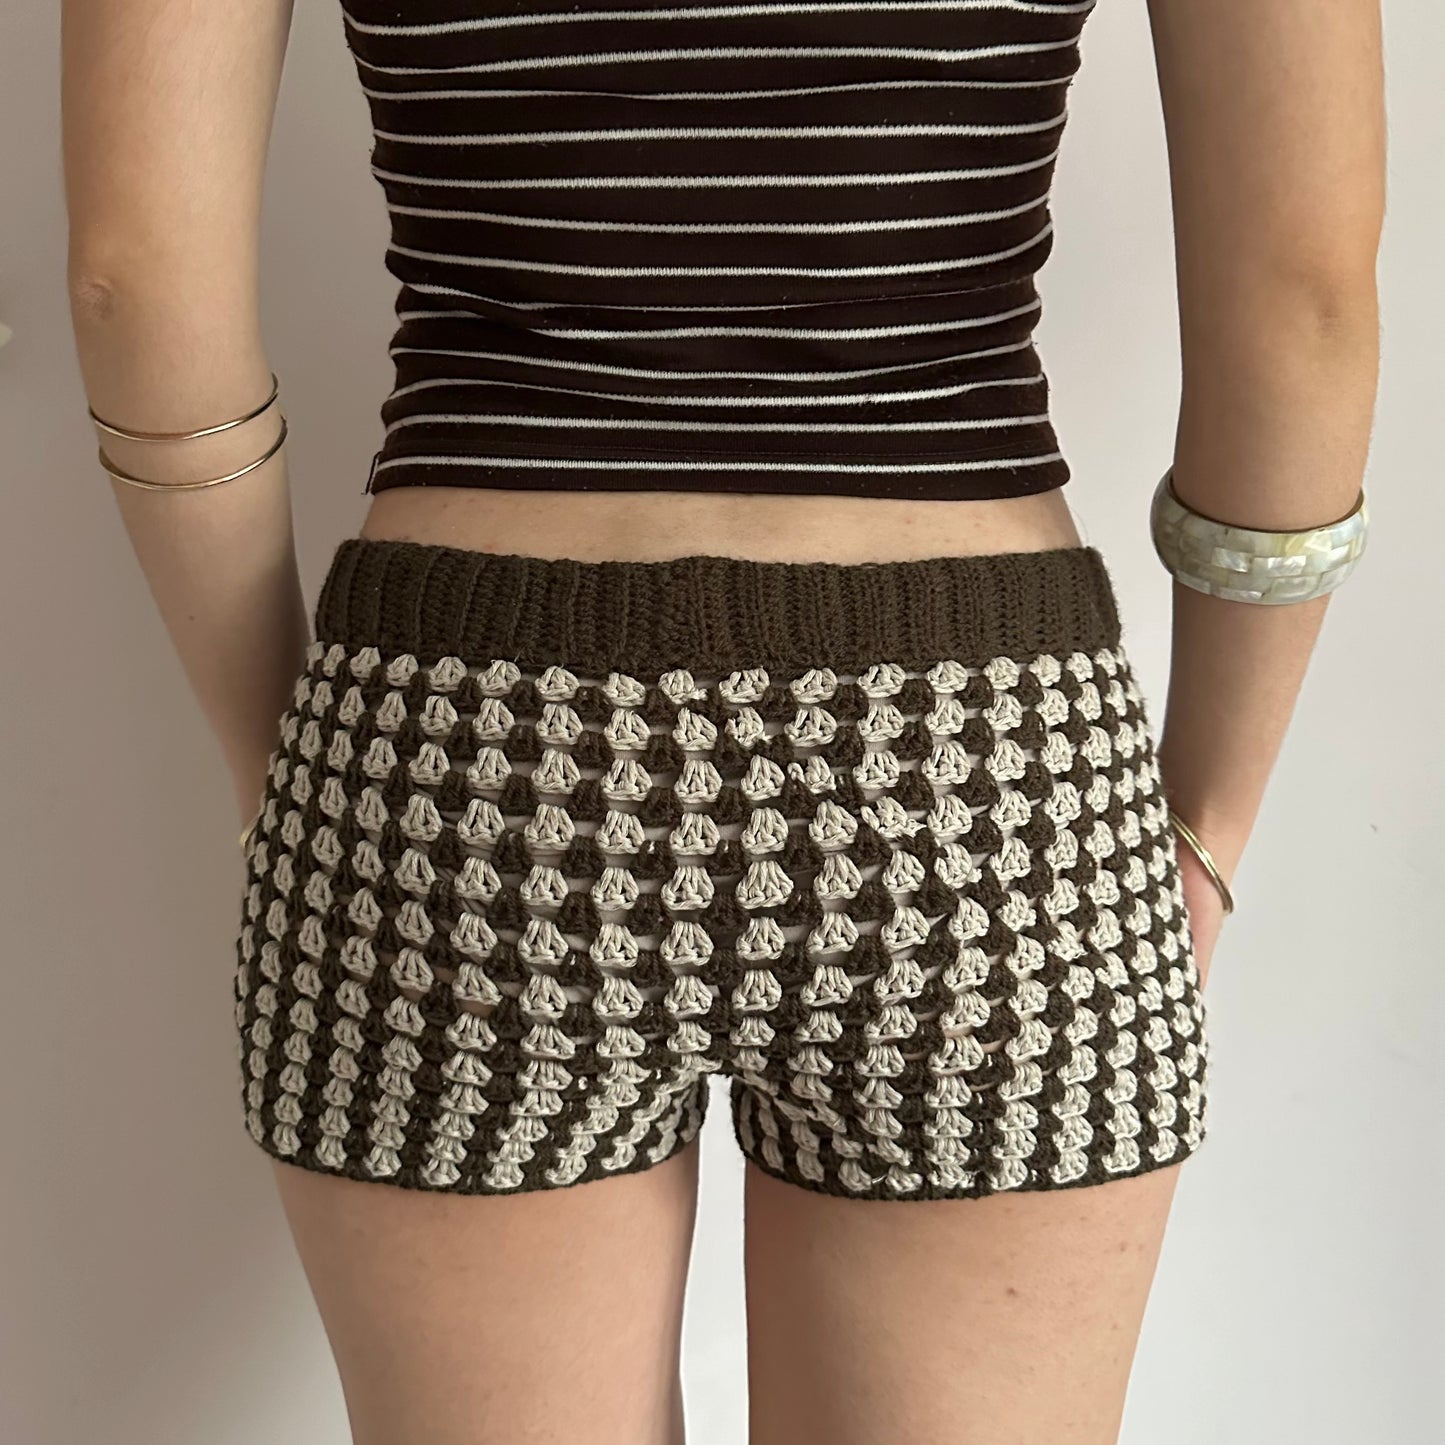 Handmade gingham crochet shorts in brown and beige